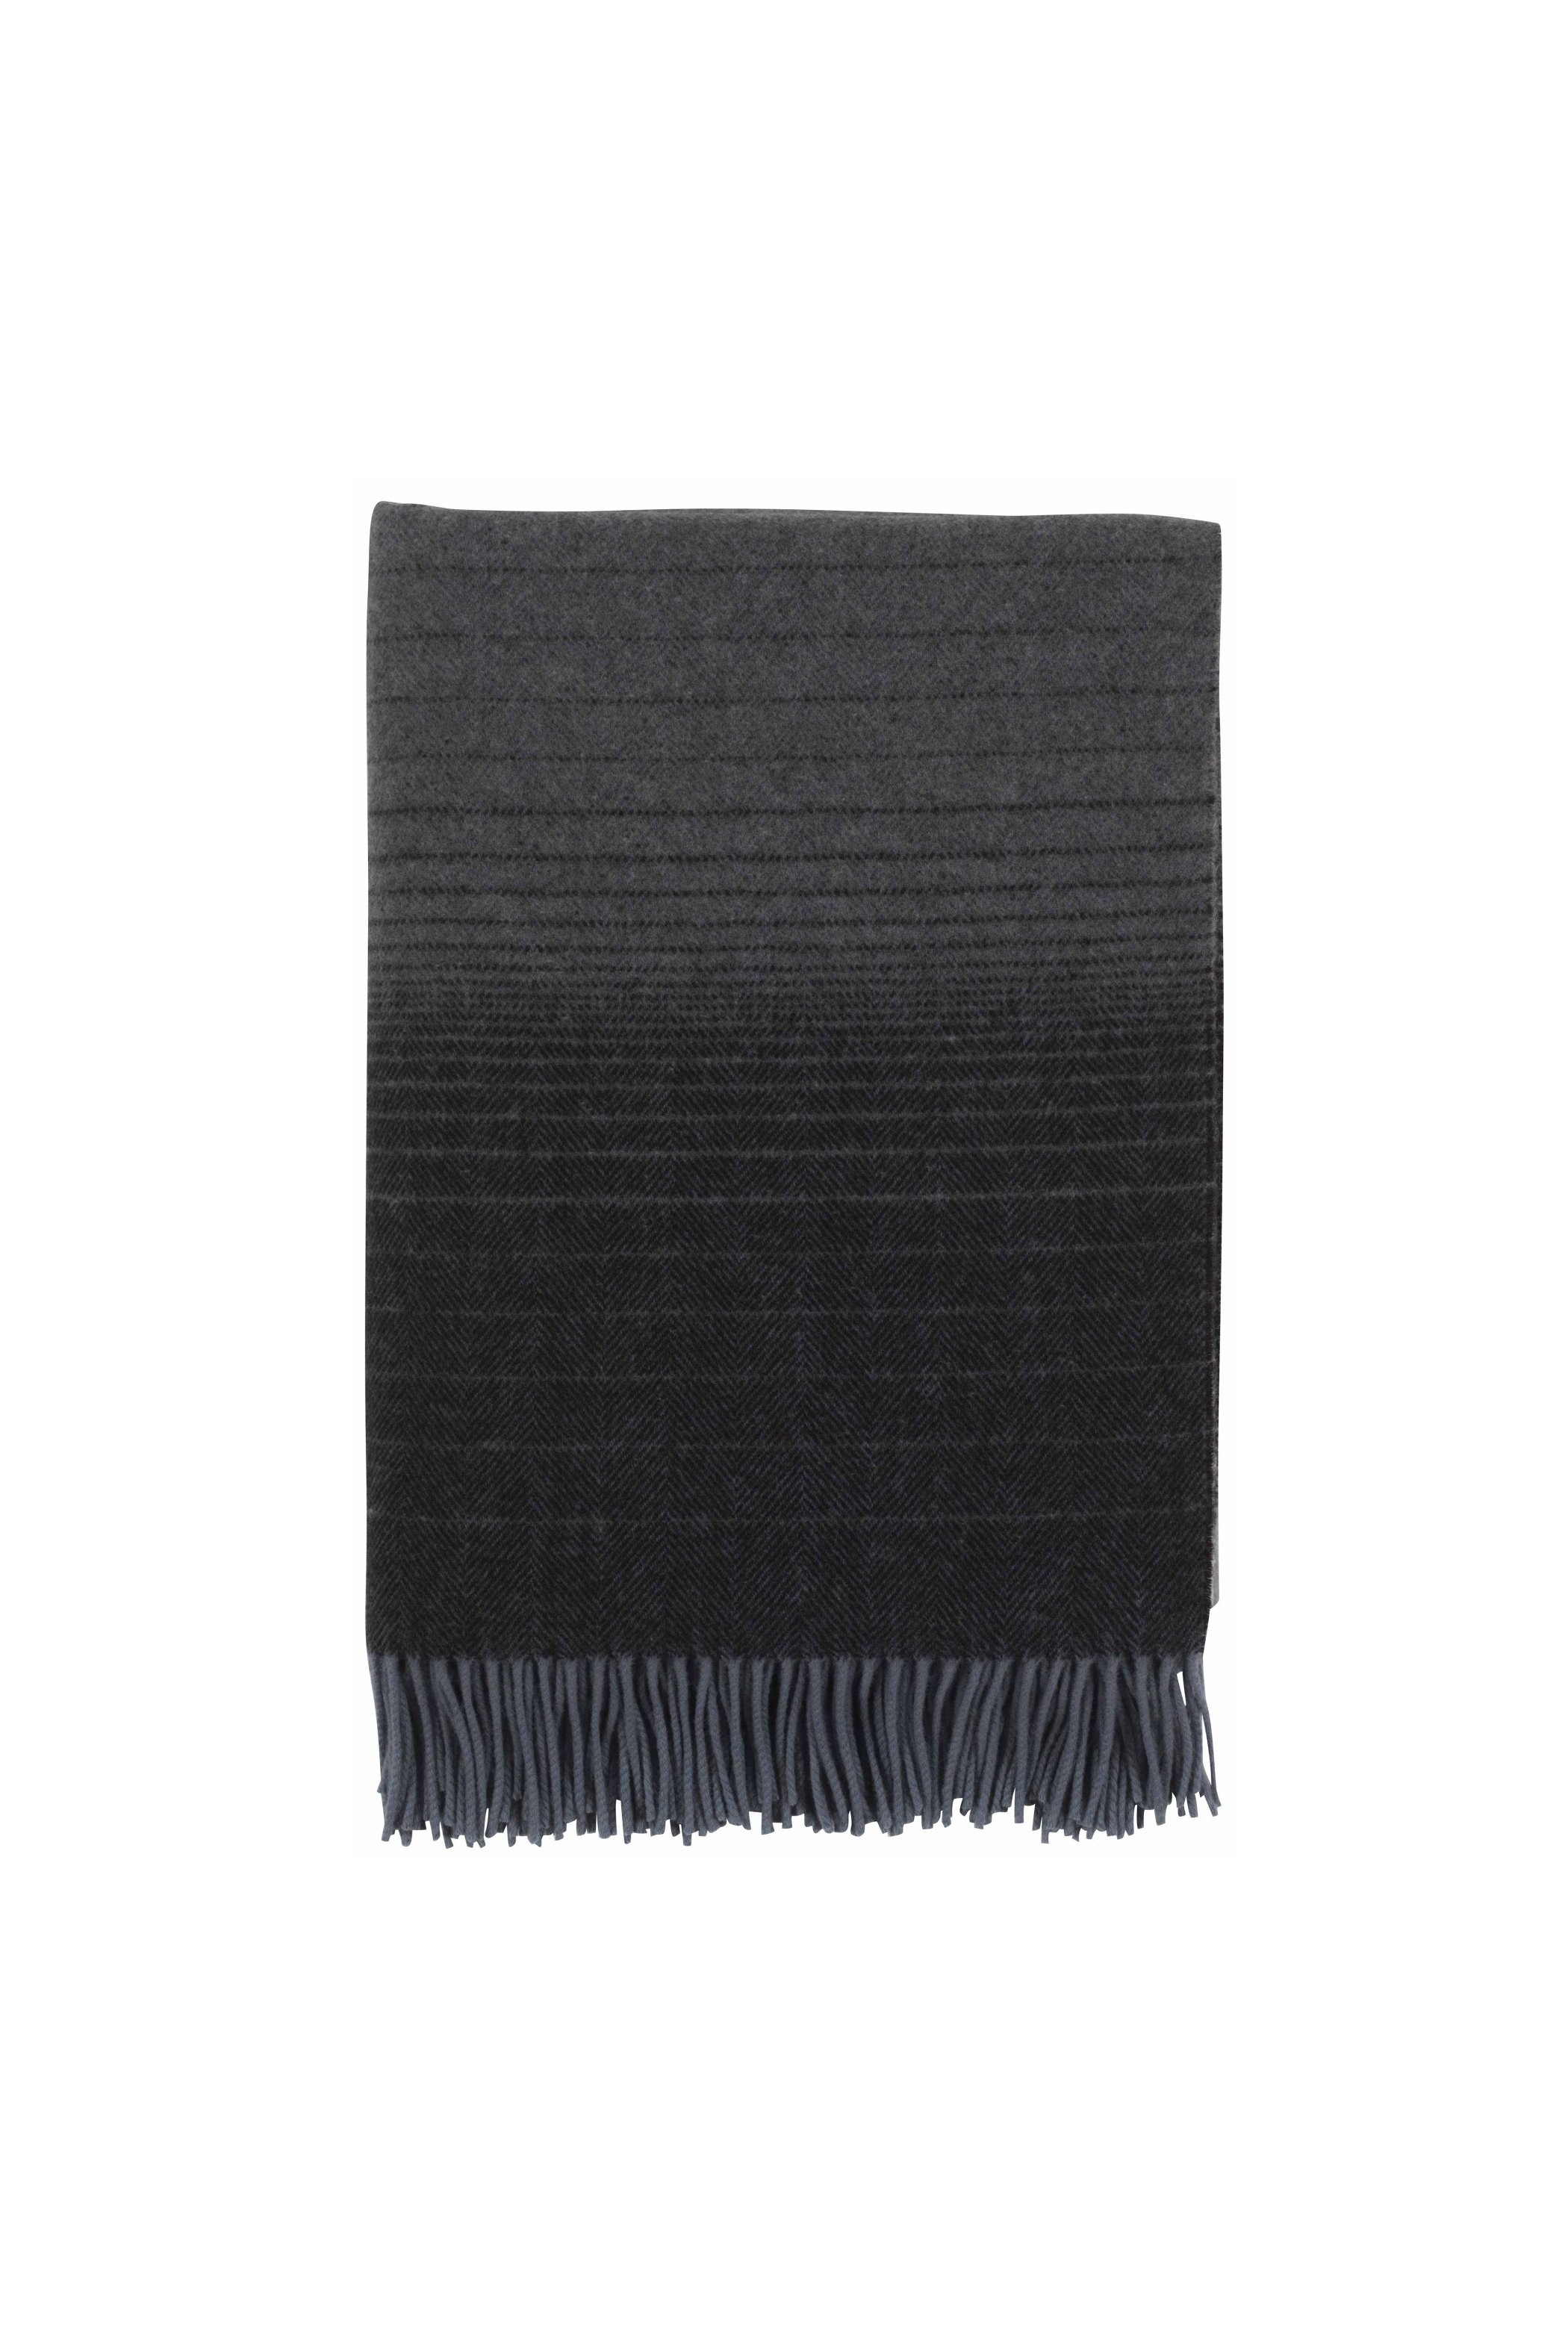 Cashmere Donegal Ombre Throw - Mist Grey